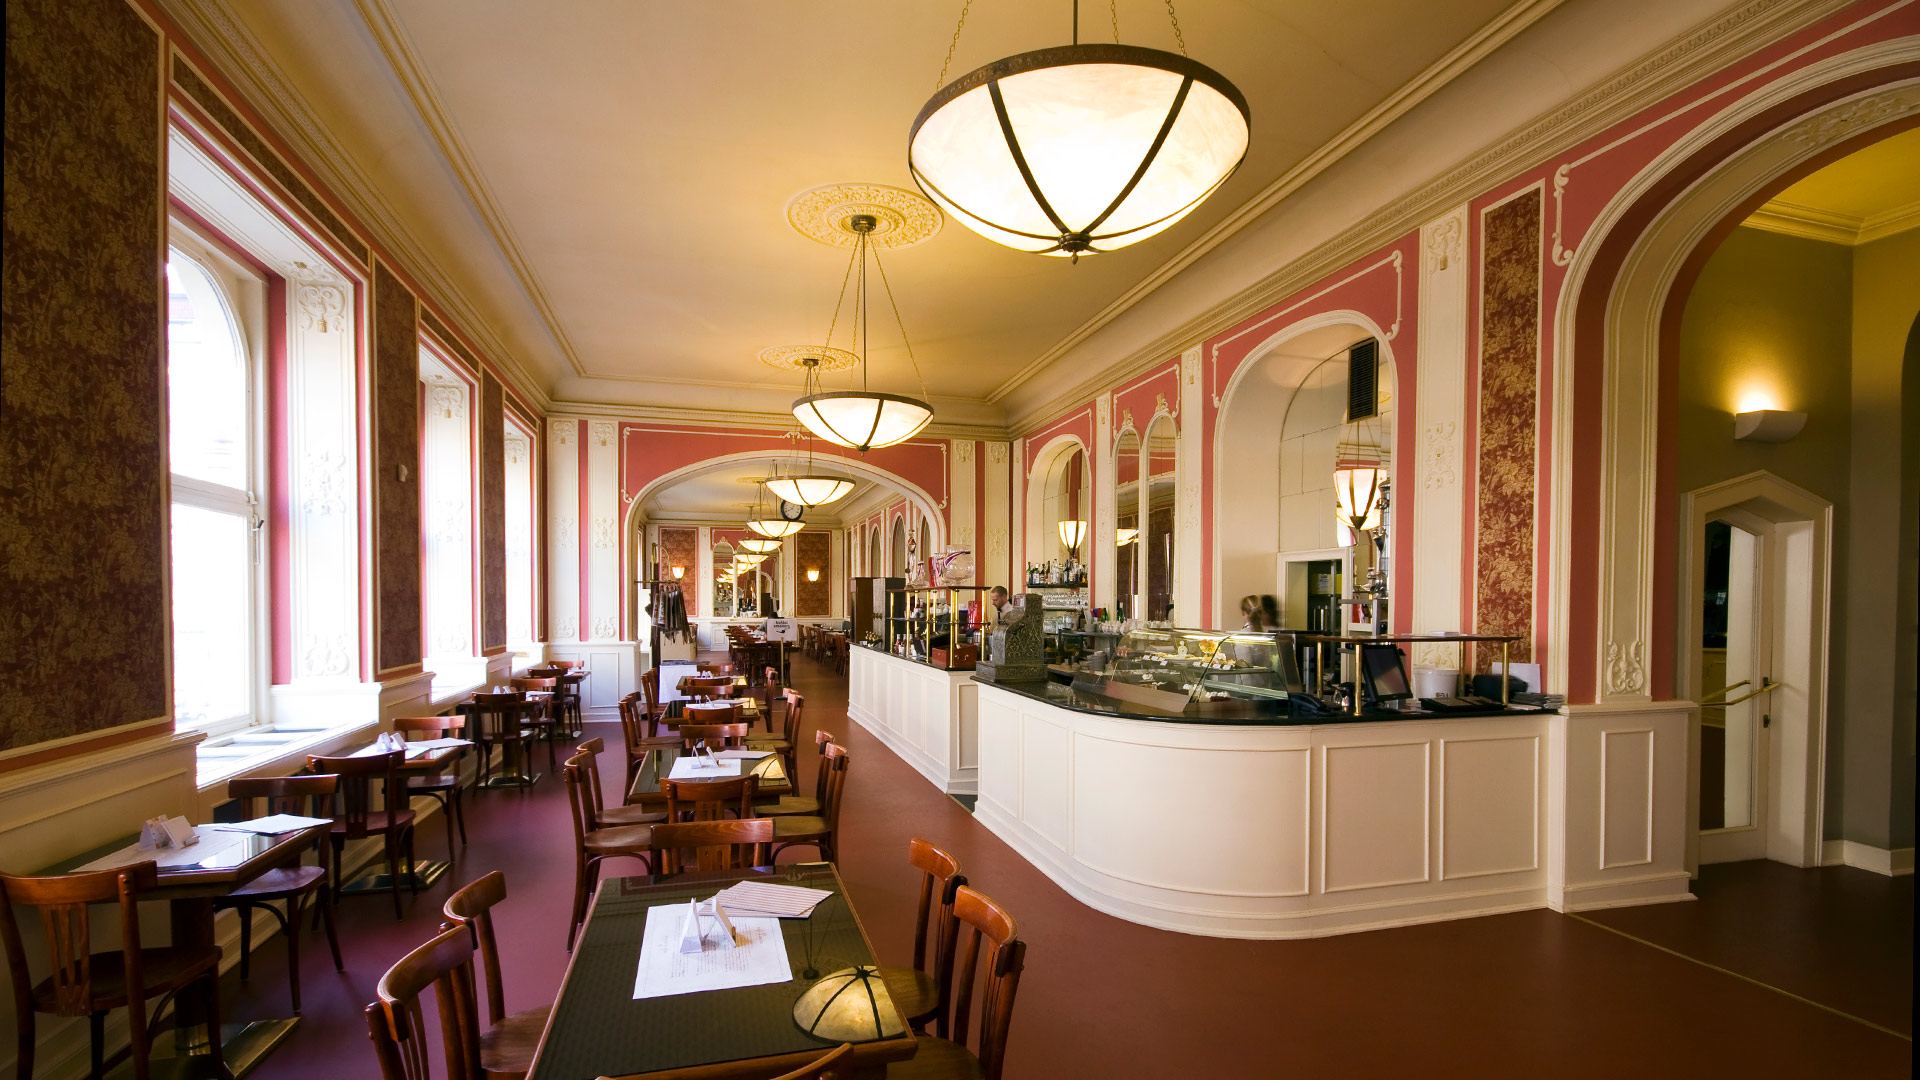 Cafe Louvre